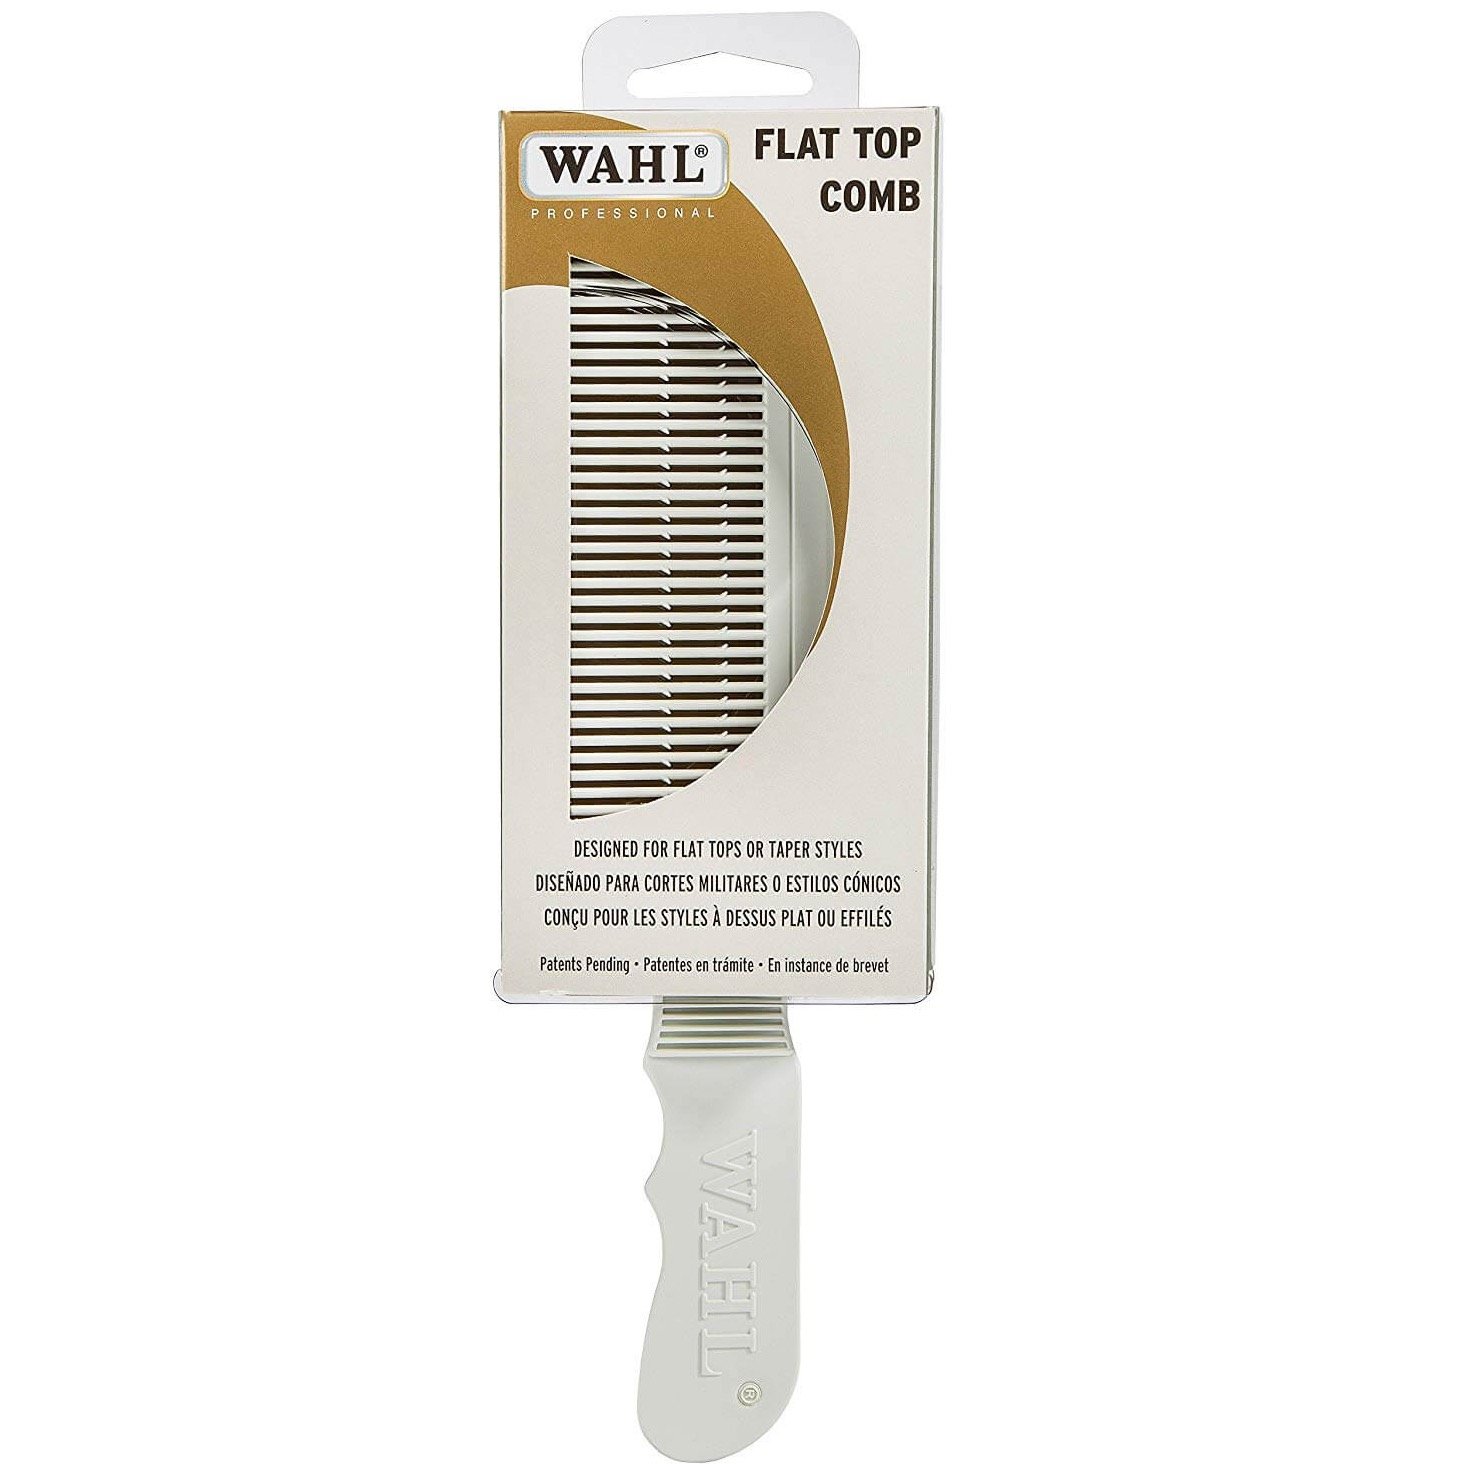 Wahl Speed Comb wit - 2.1 - 03329-117